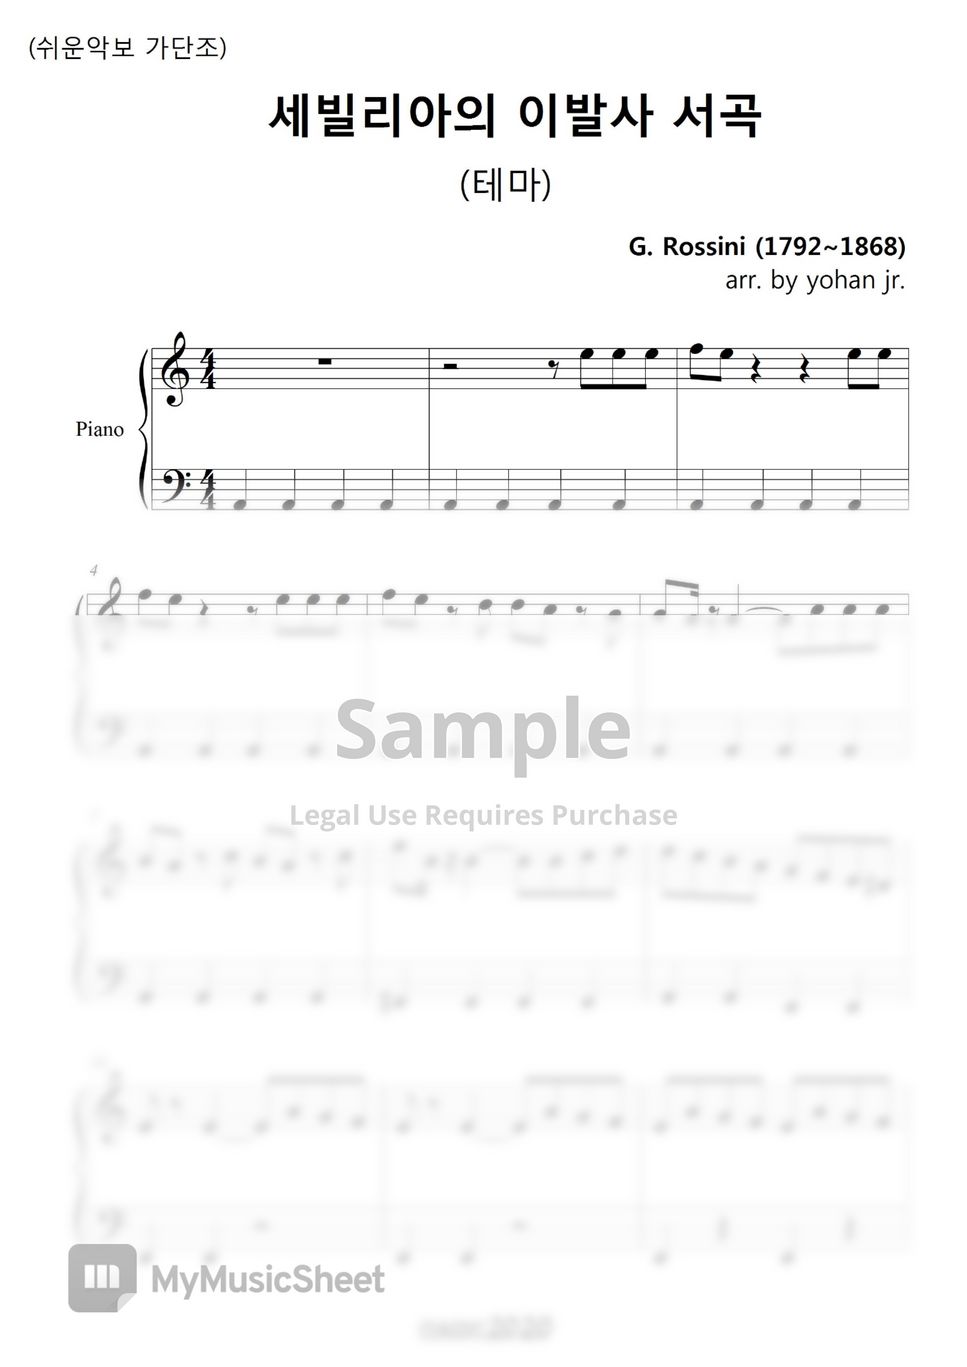 G. Rossini - The Barber of Seville  (a minor) (easy piano) by classic2020